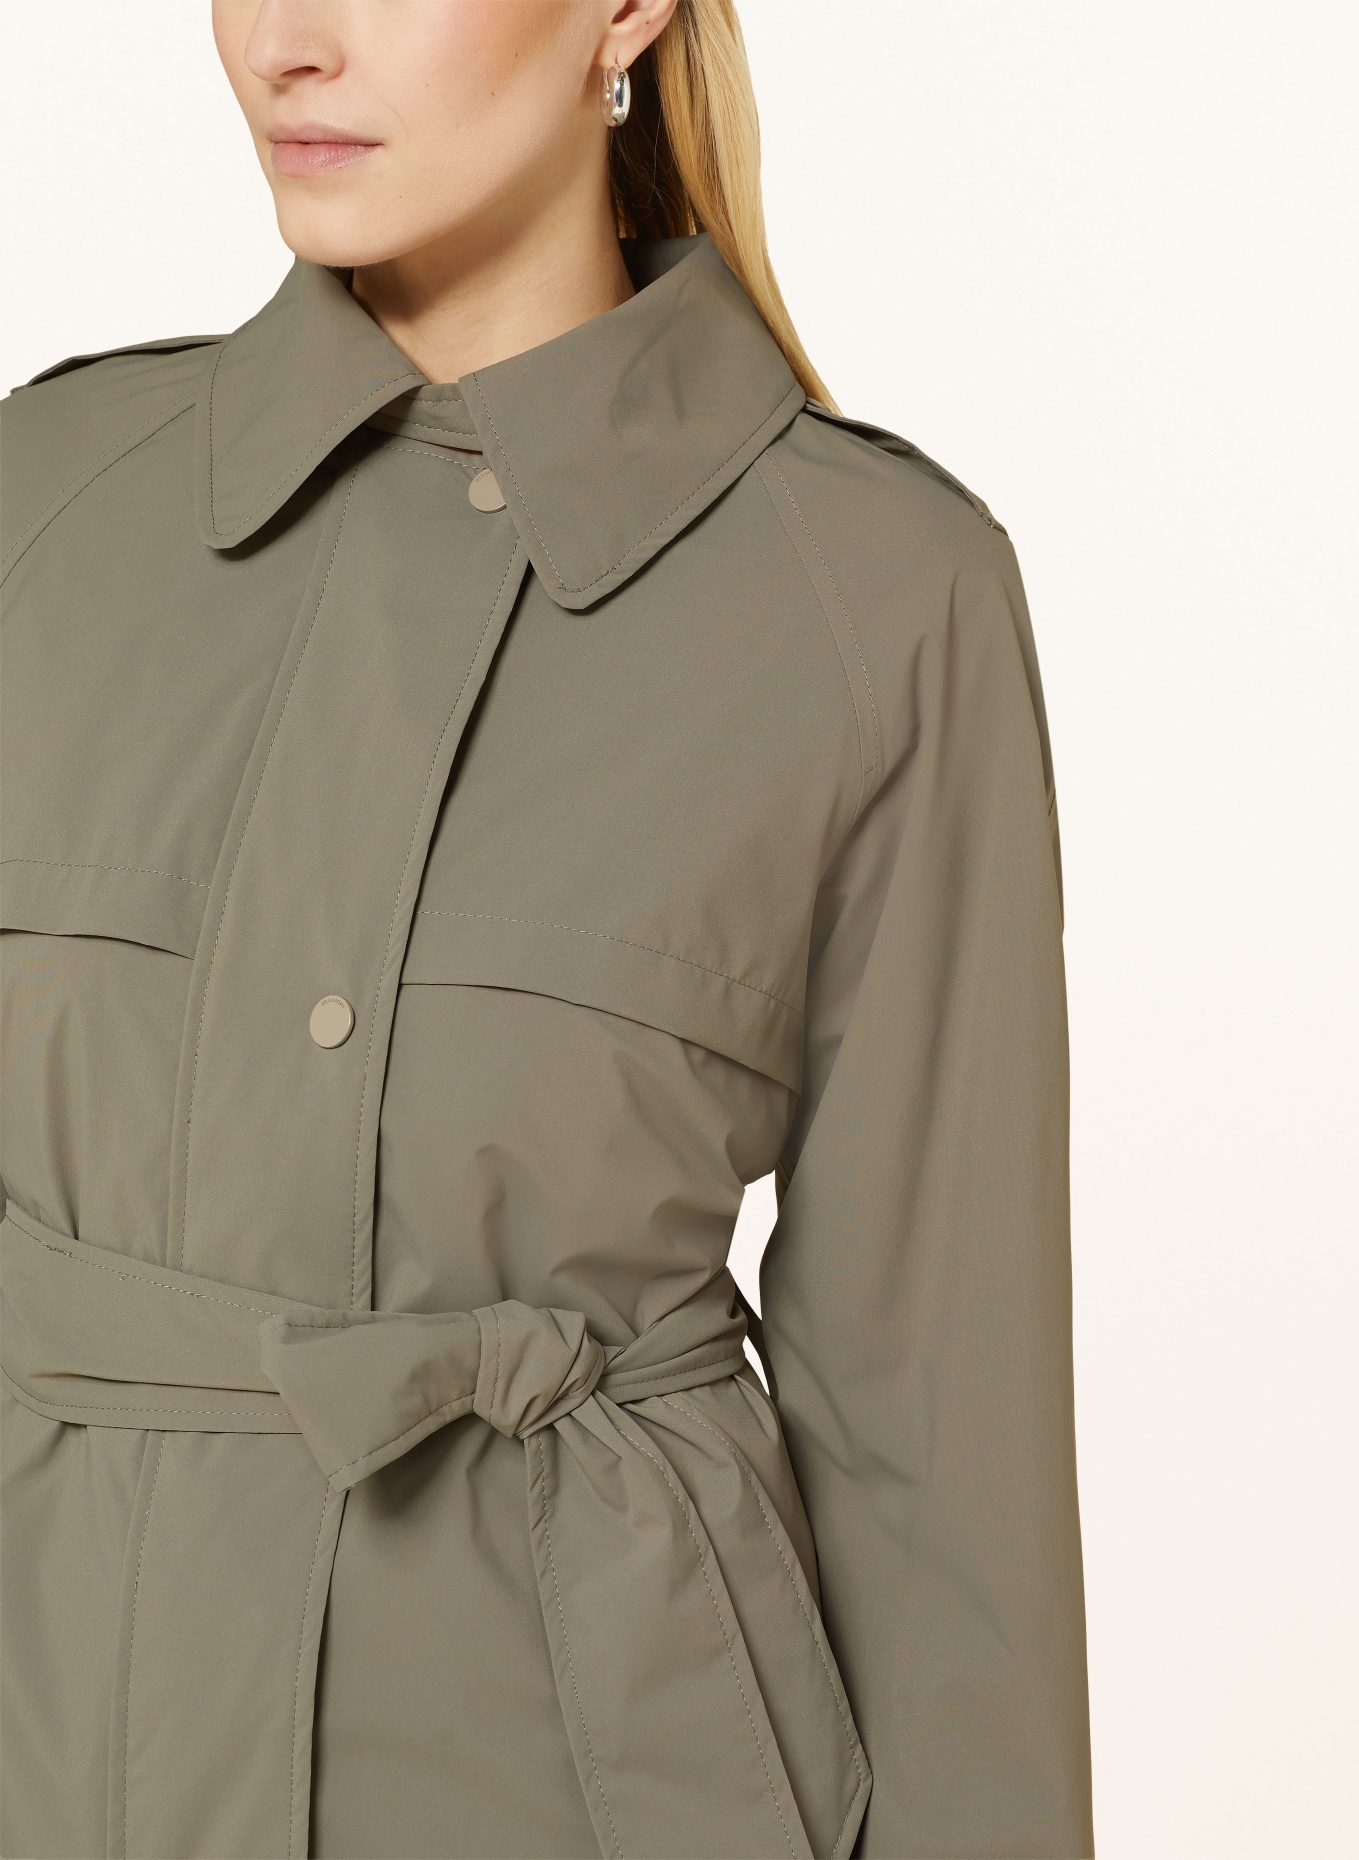 BEAUMONT Trench coat BRINKLEY with detachable hood, Color: KHAKI (Image 6)